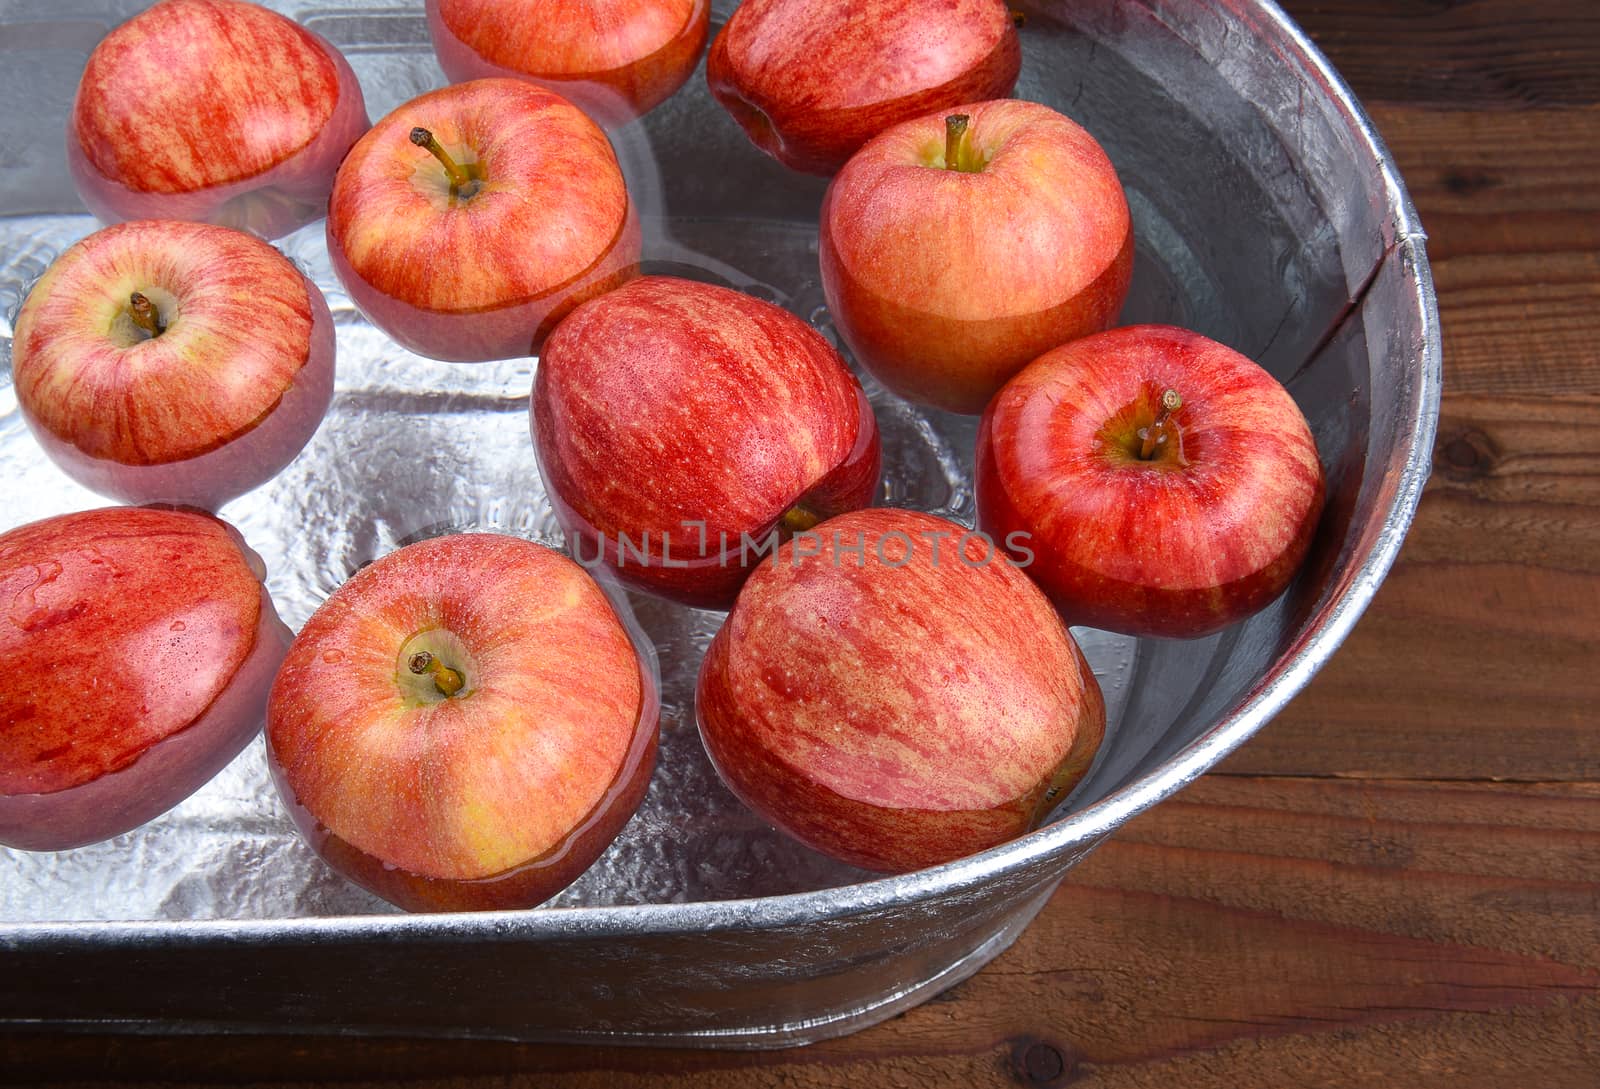 A metal tub filled with water and apples for the Halloween custom of Apple Bobbing.